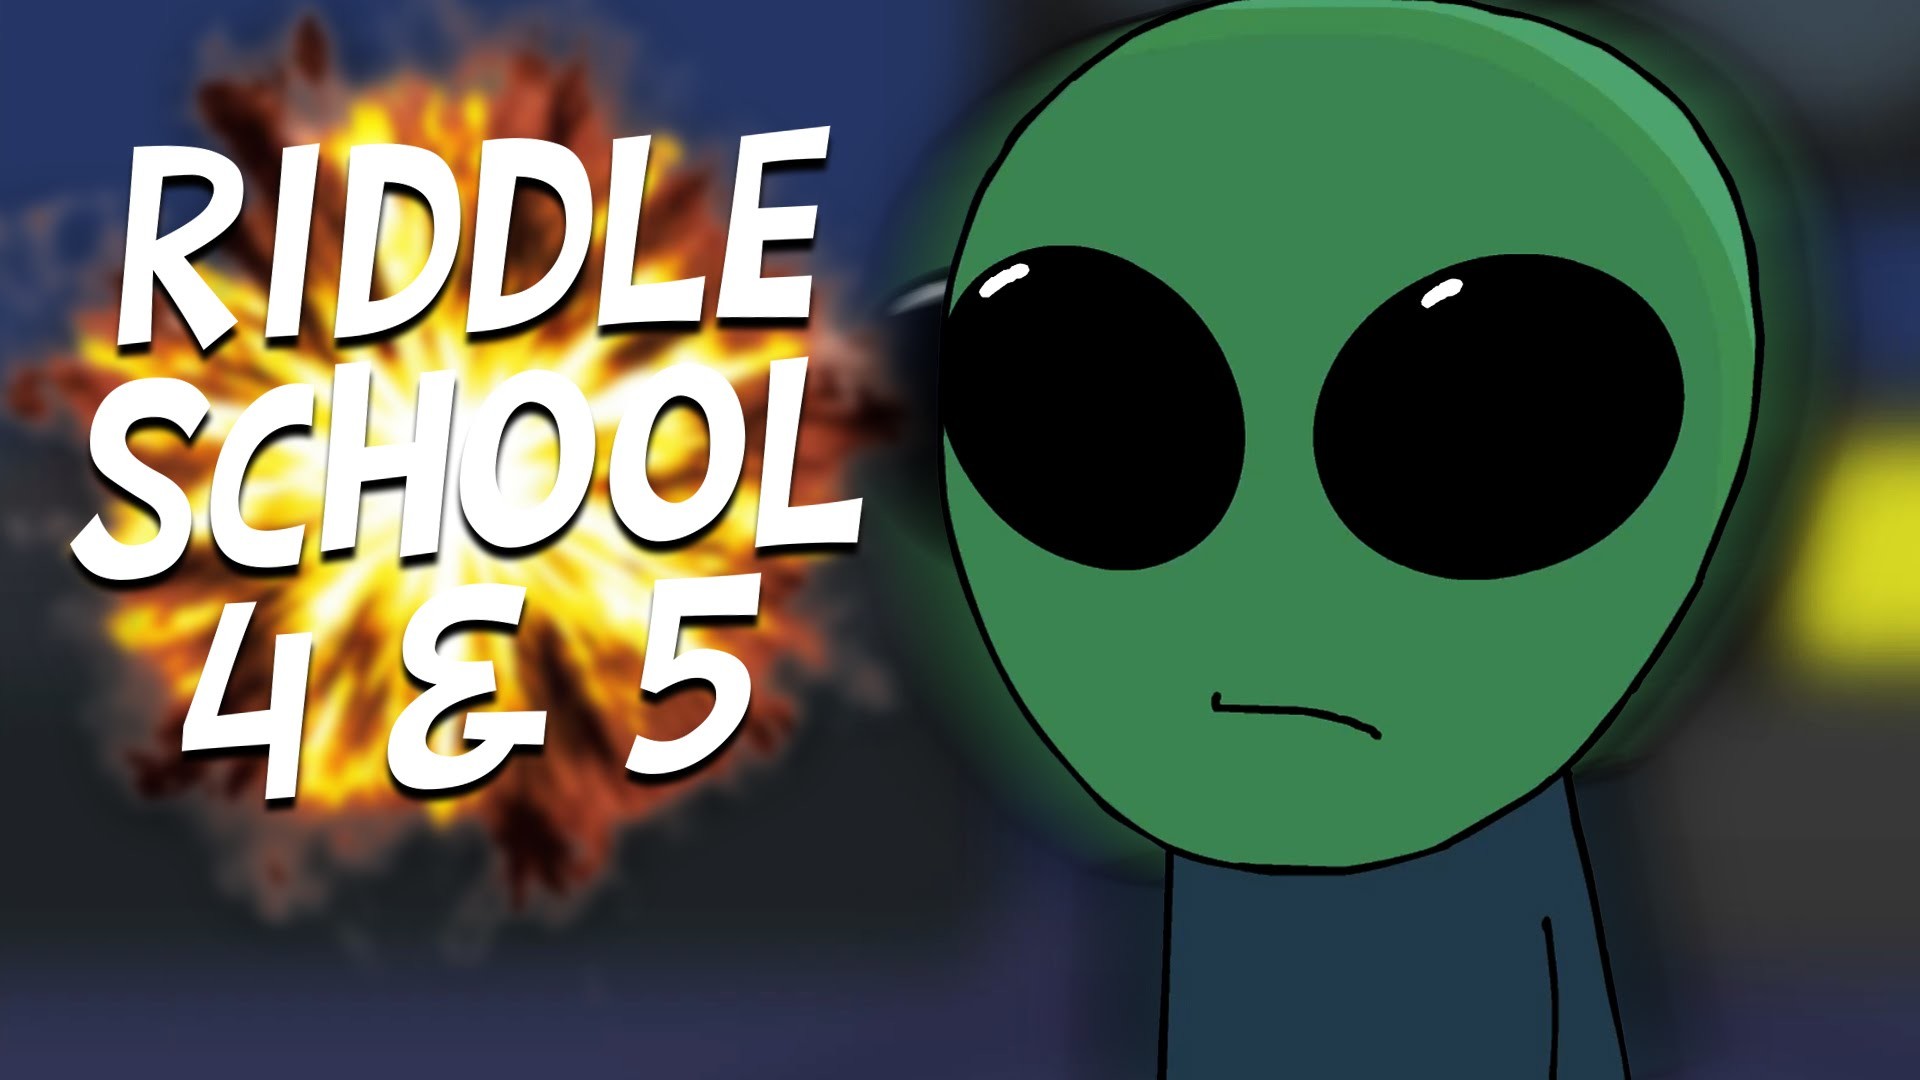 Riddle School images Diz (Jacksepticeye thumbnail) HD wallpaper and  background photos